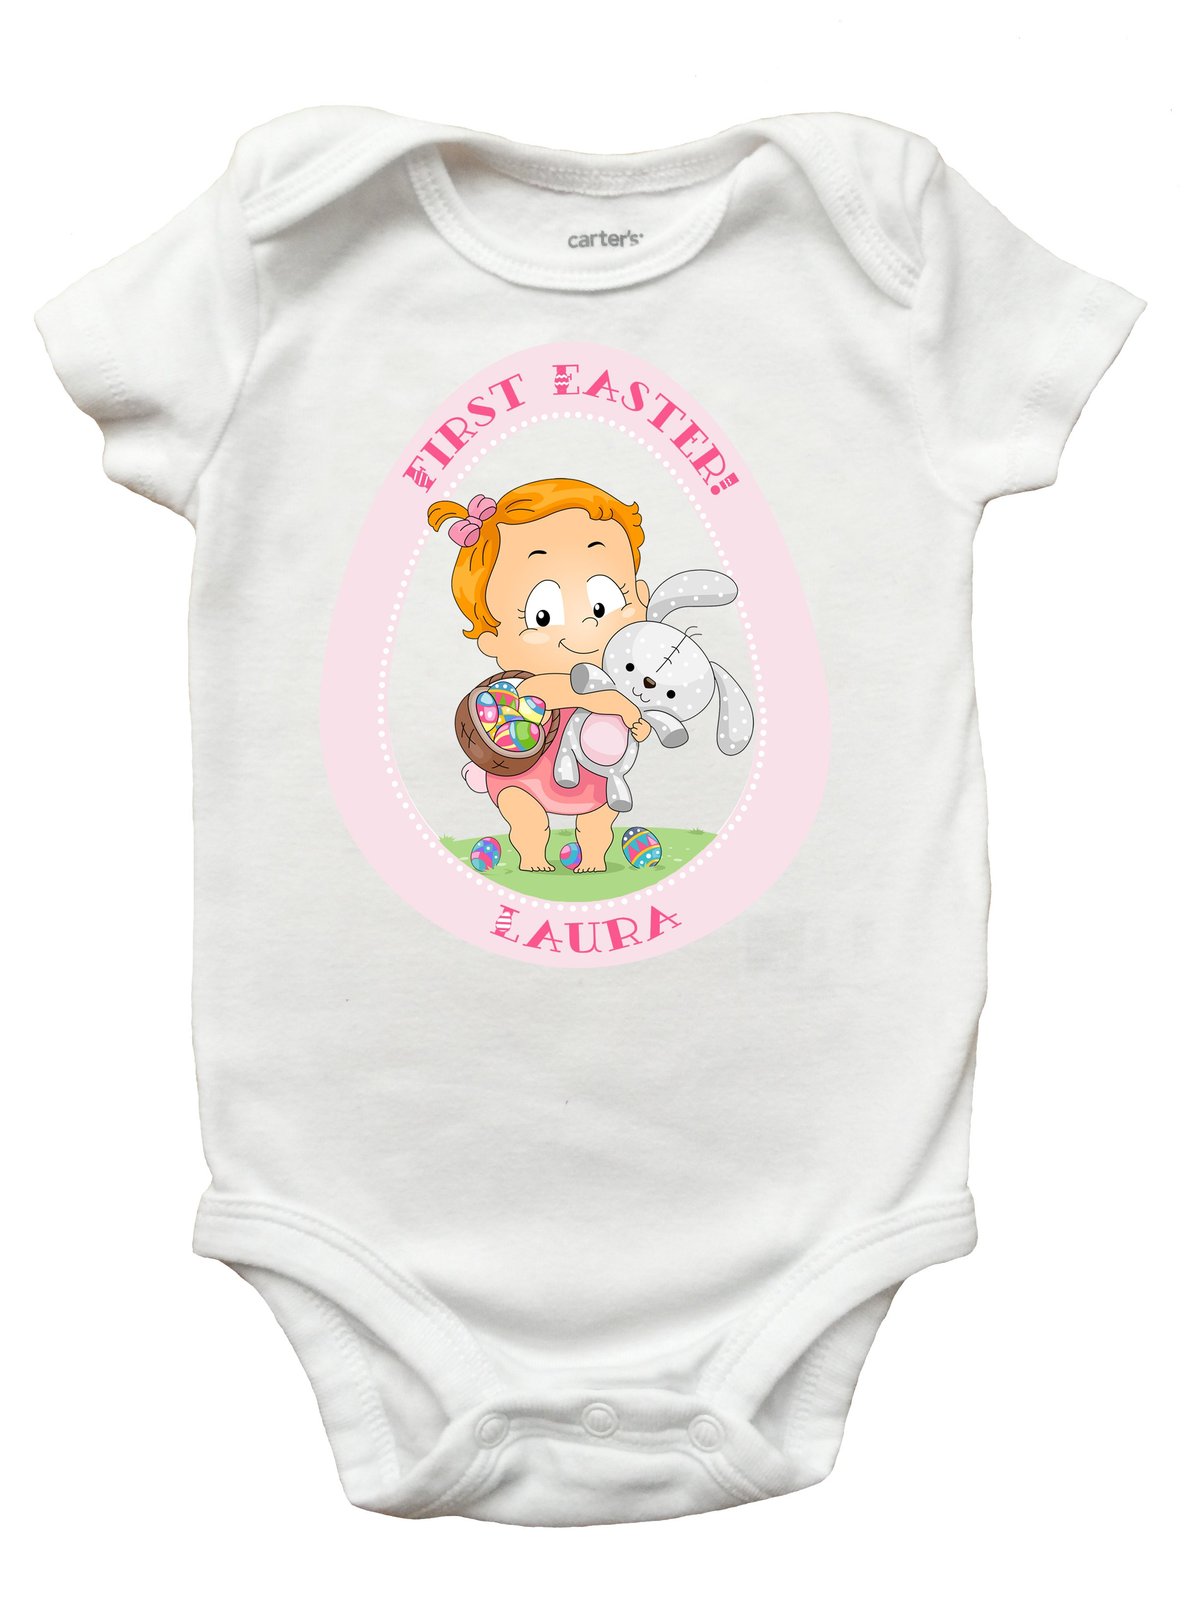 My First Easter Shirt, My First Easter Onesie, Personalized First Easter Shirt - $11.99